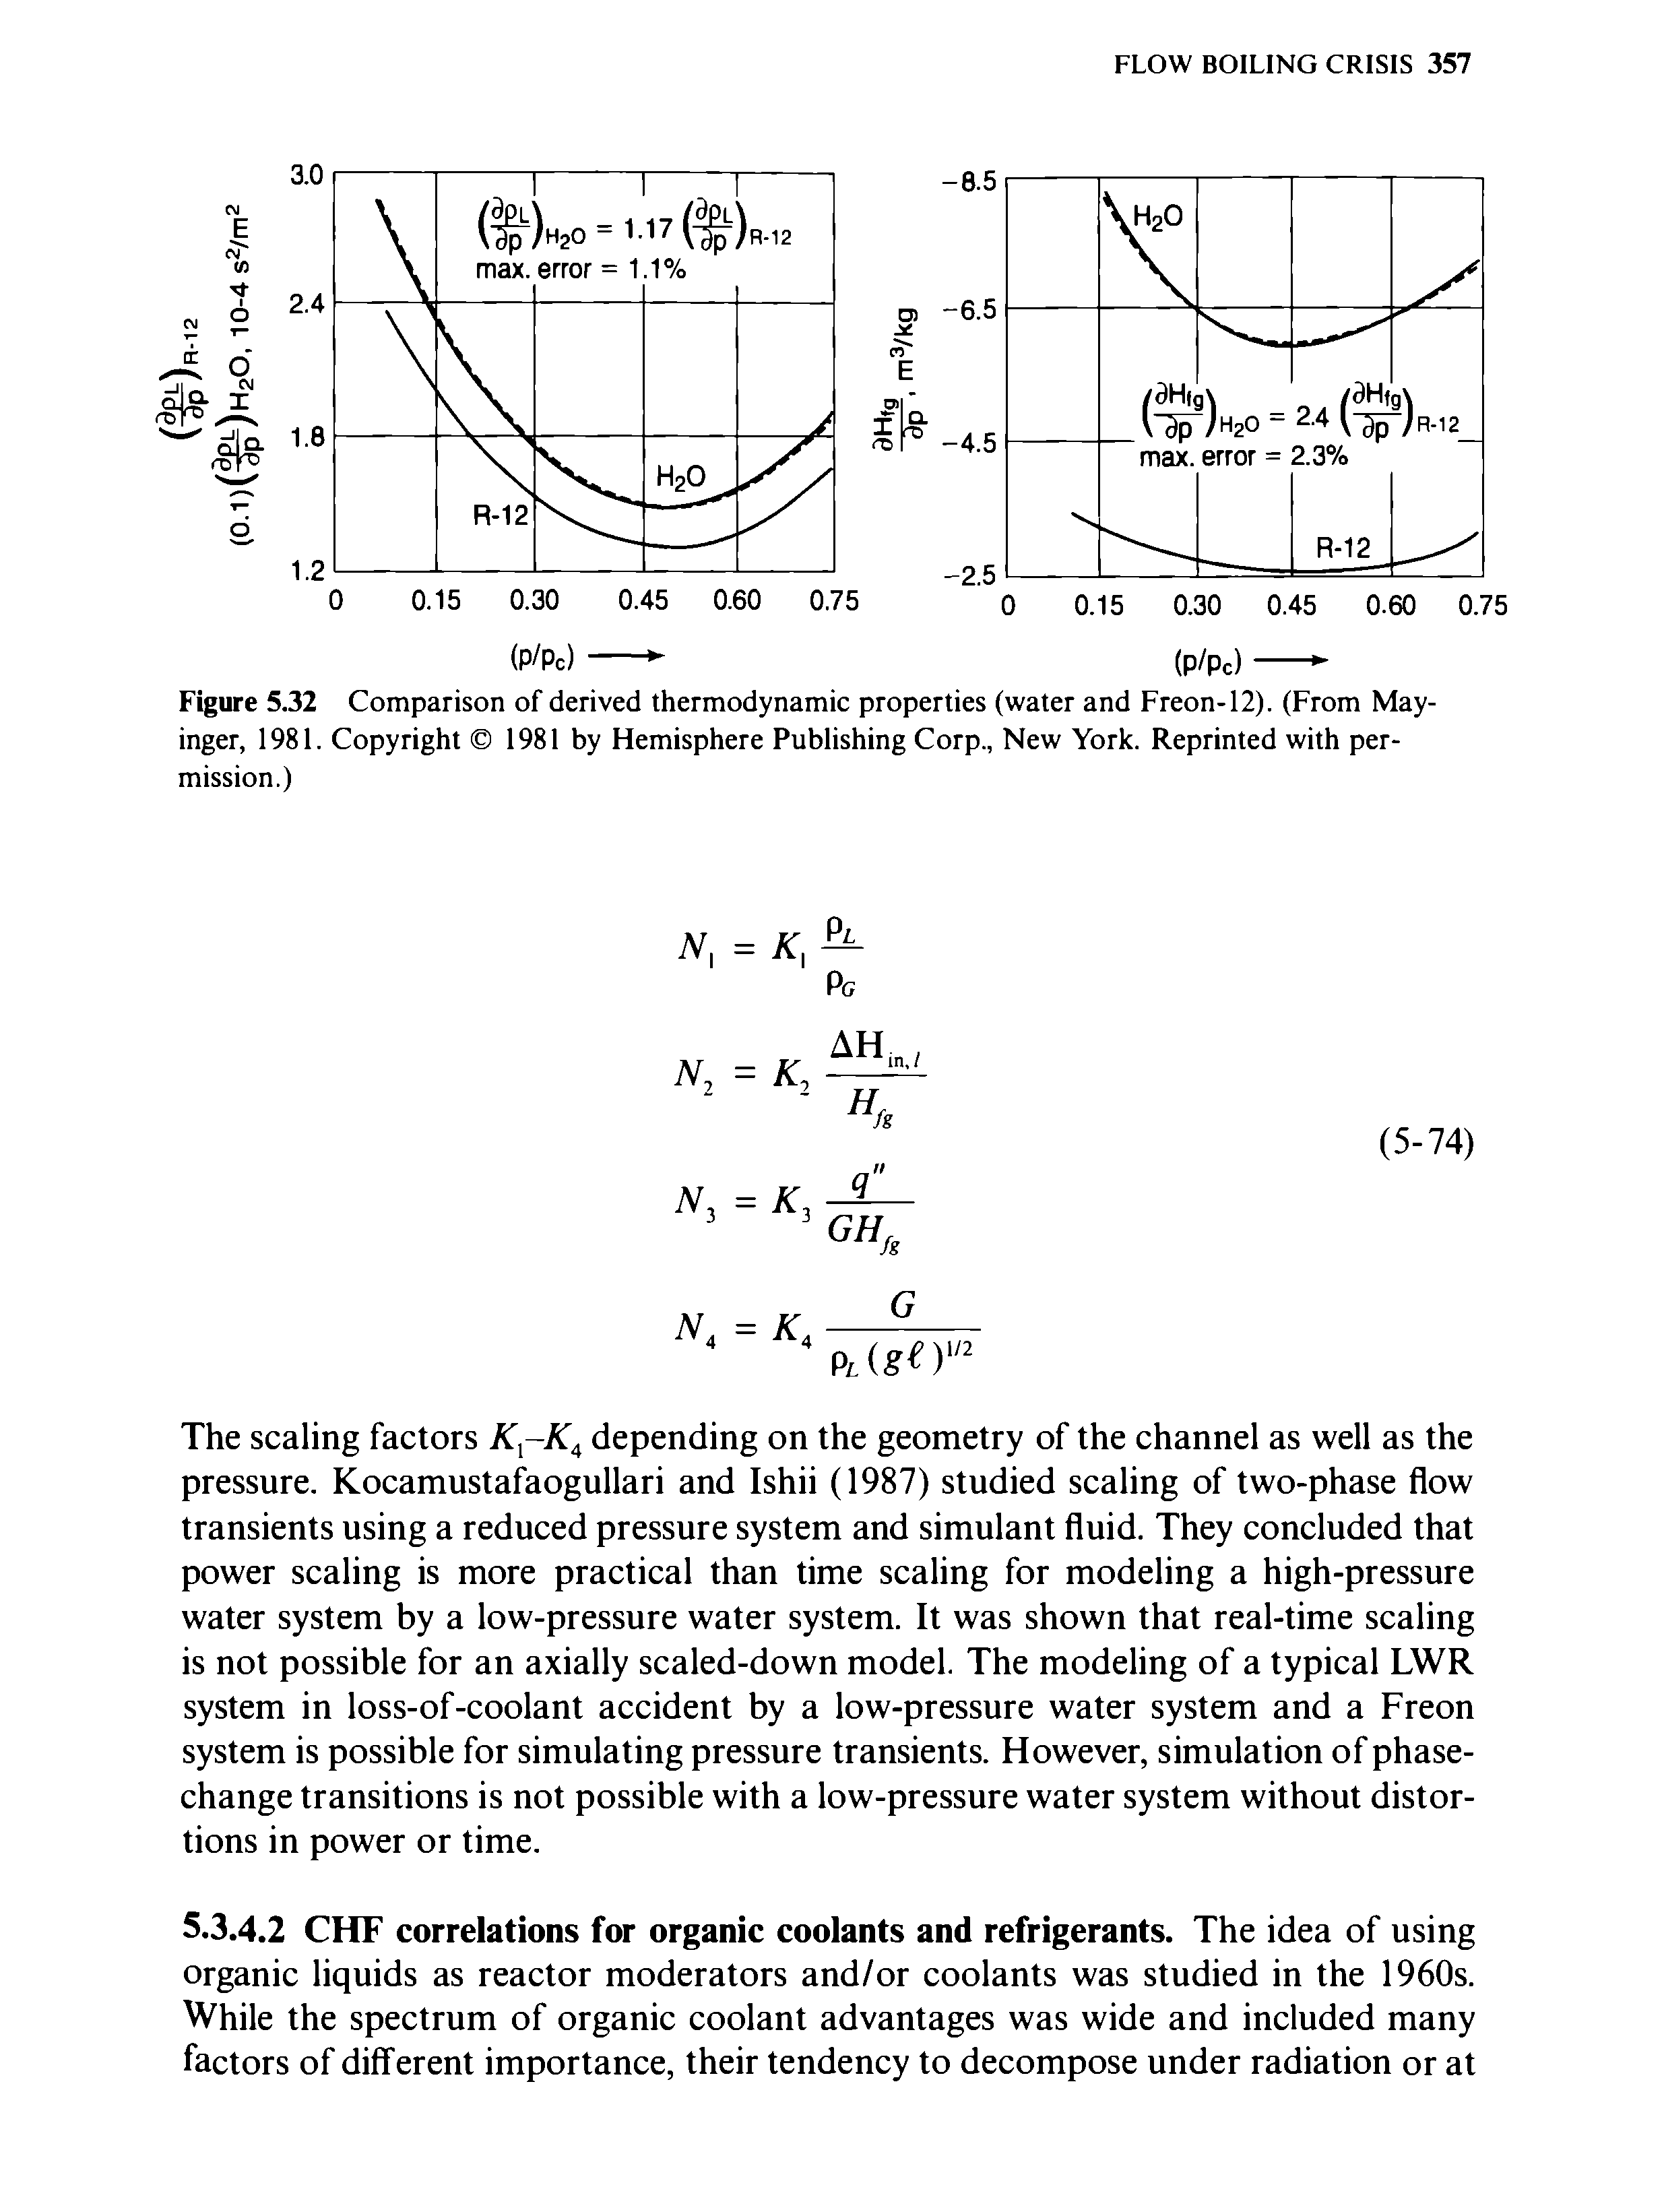 Figure 5.32 Comparison of derived thermodynamic properties (water and Freon-12). (From May-inger, 1981. Copyright 1981 by Hemisphere Publishing Corp., New York. Reprinted with permission.)...